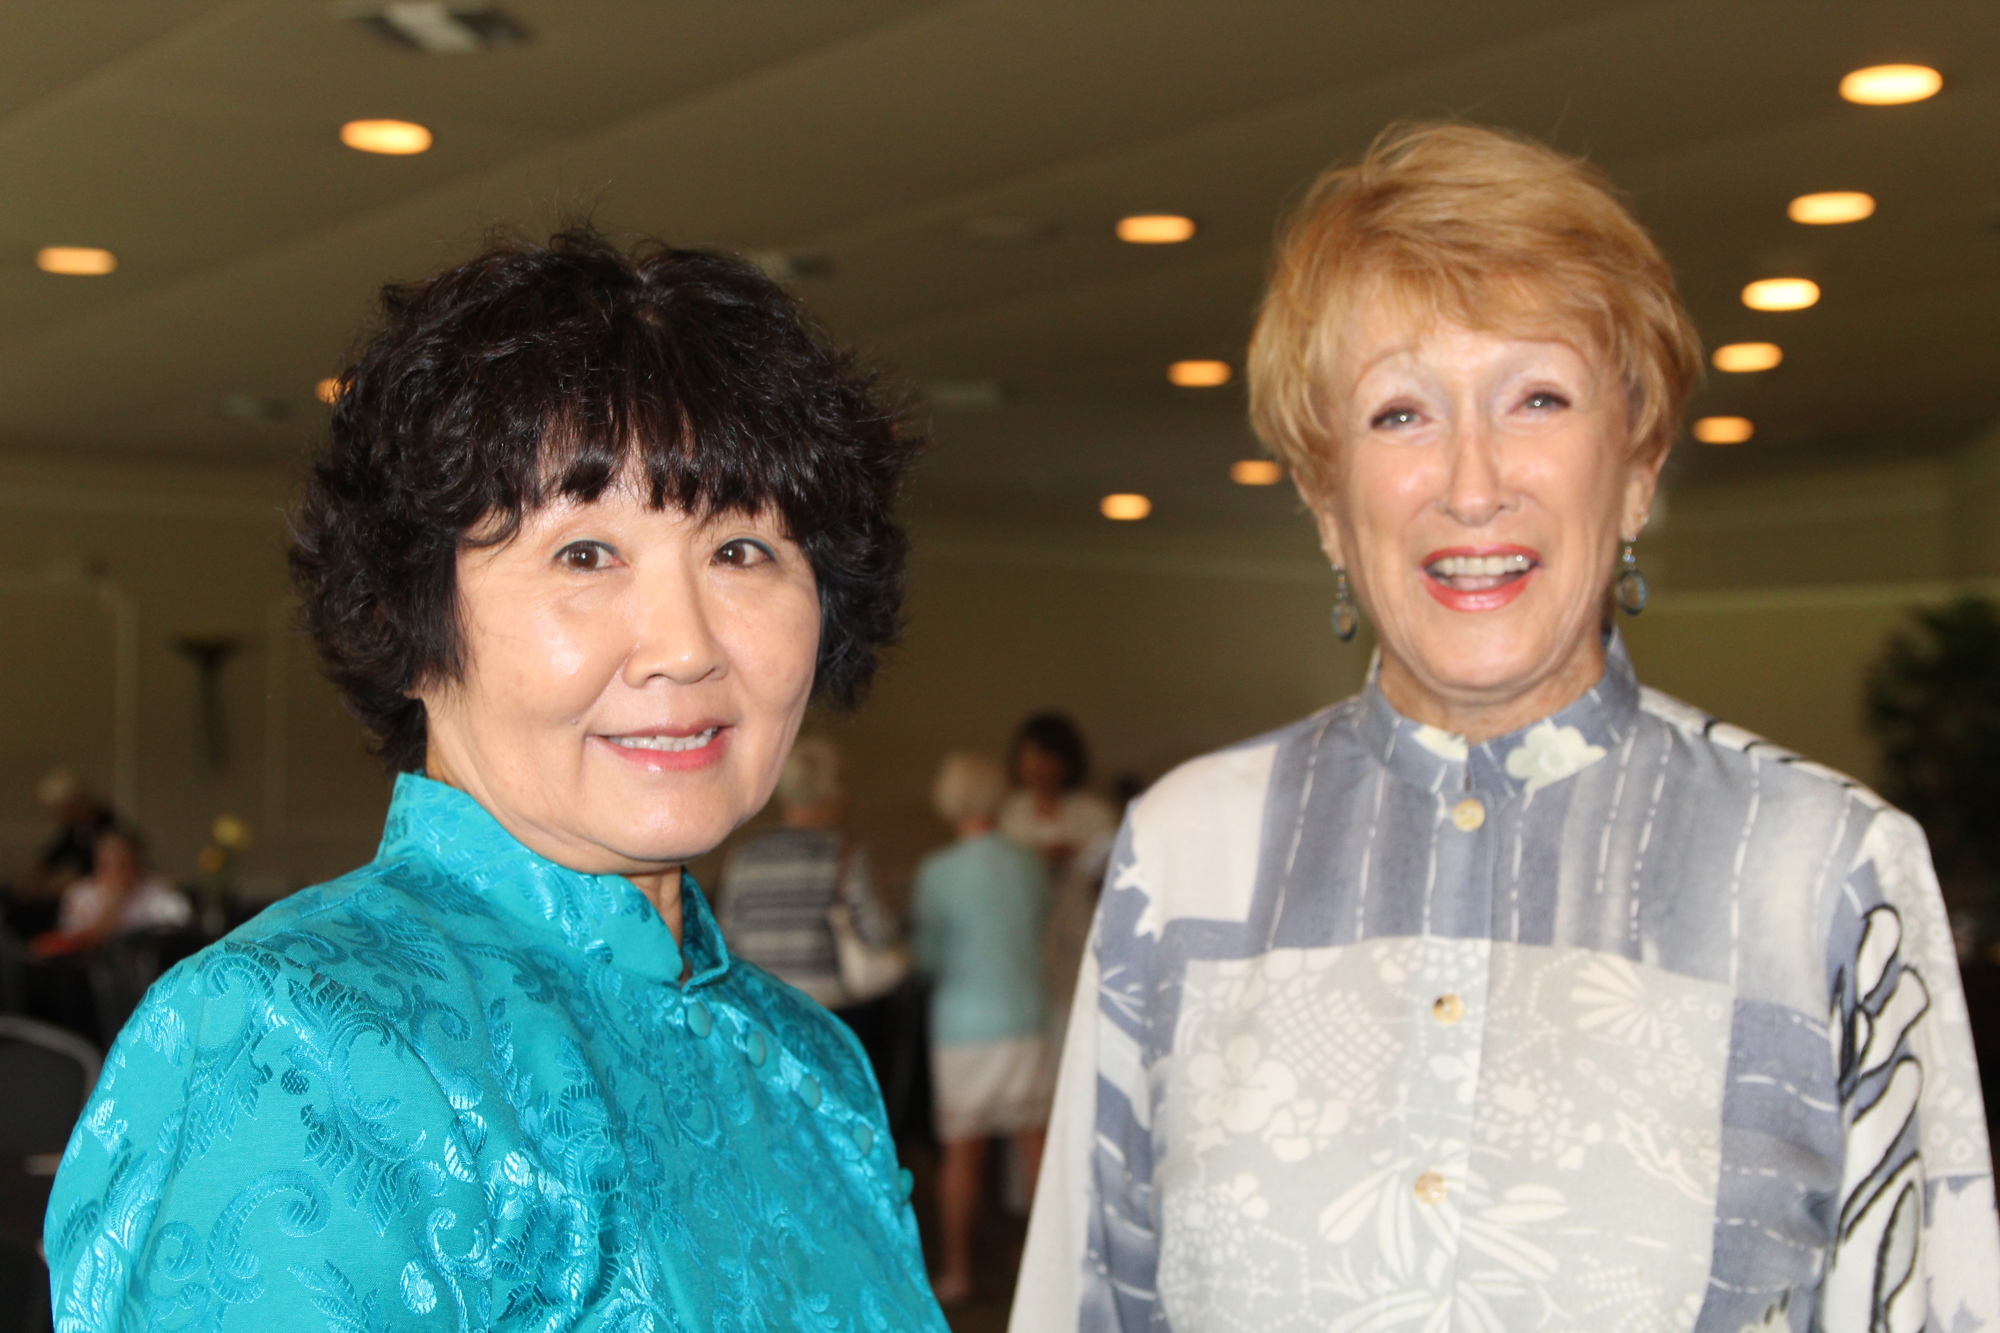 Kim Young and Eleanor Champlain peruse the fashion at the style show. Photo by Tanya Russo